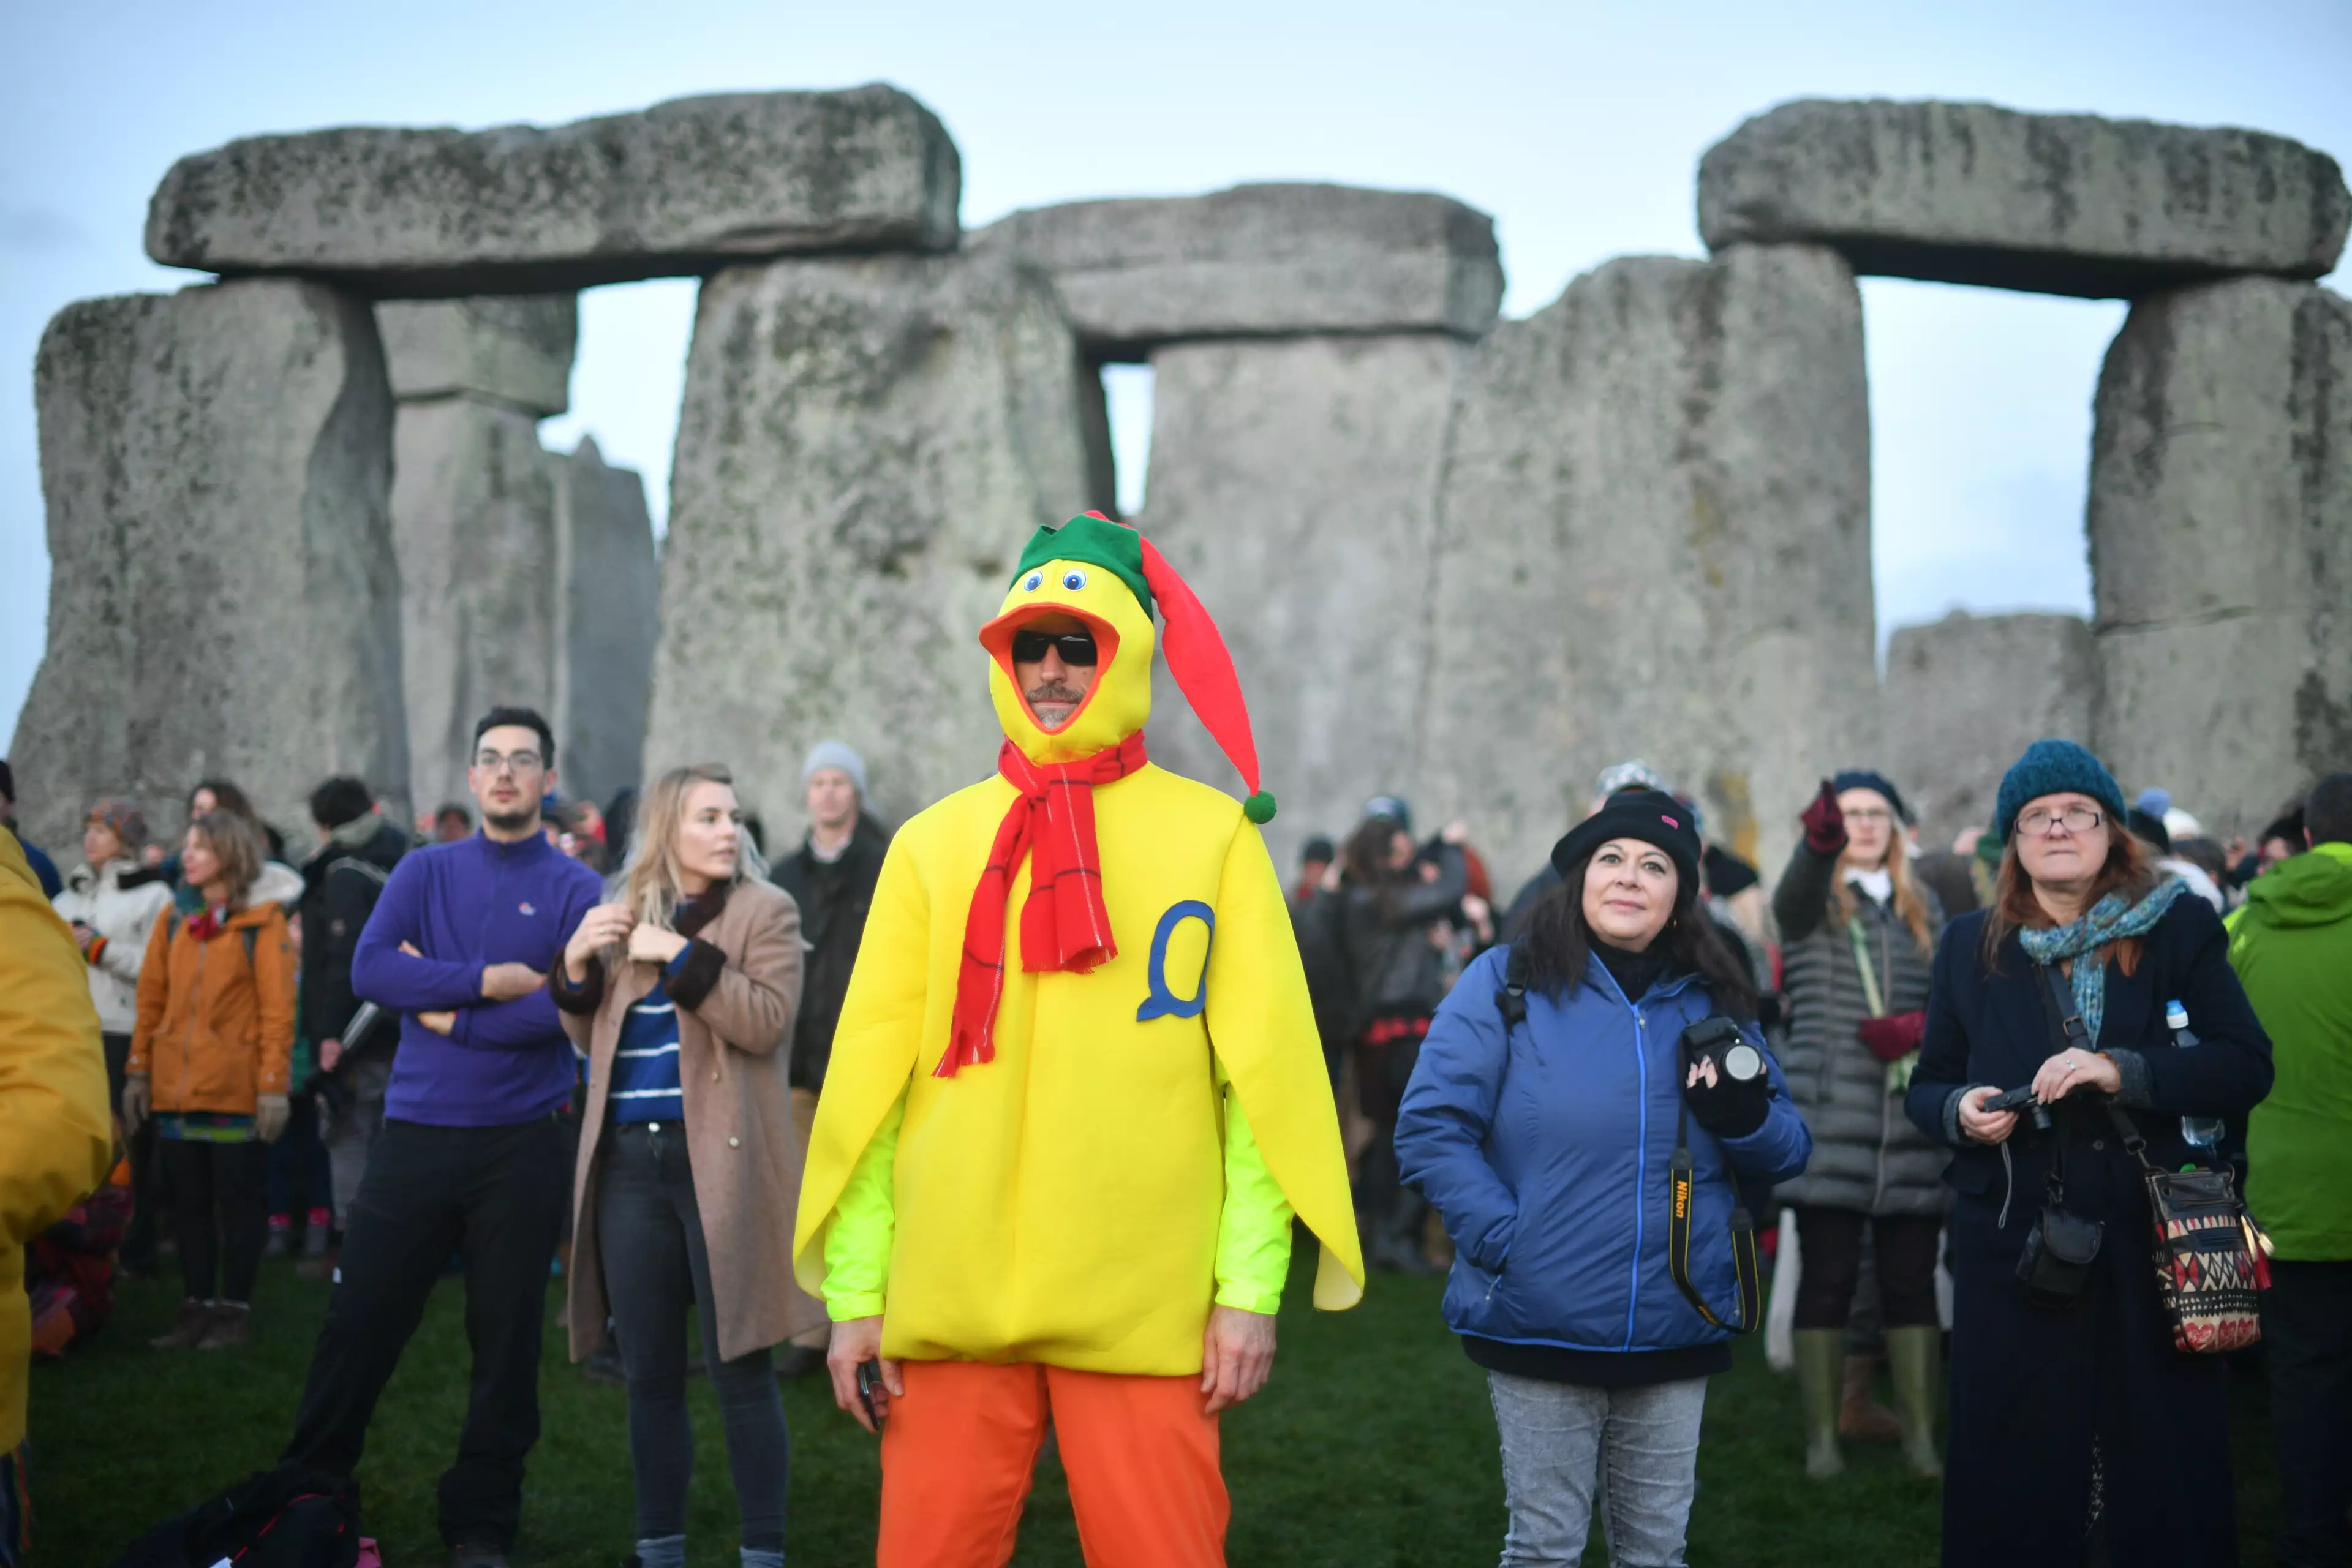 However, despite the breakthrough, it didn't solve the riddle of how Stonehenge was created.